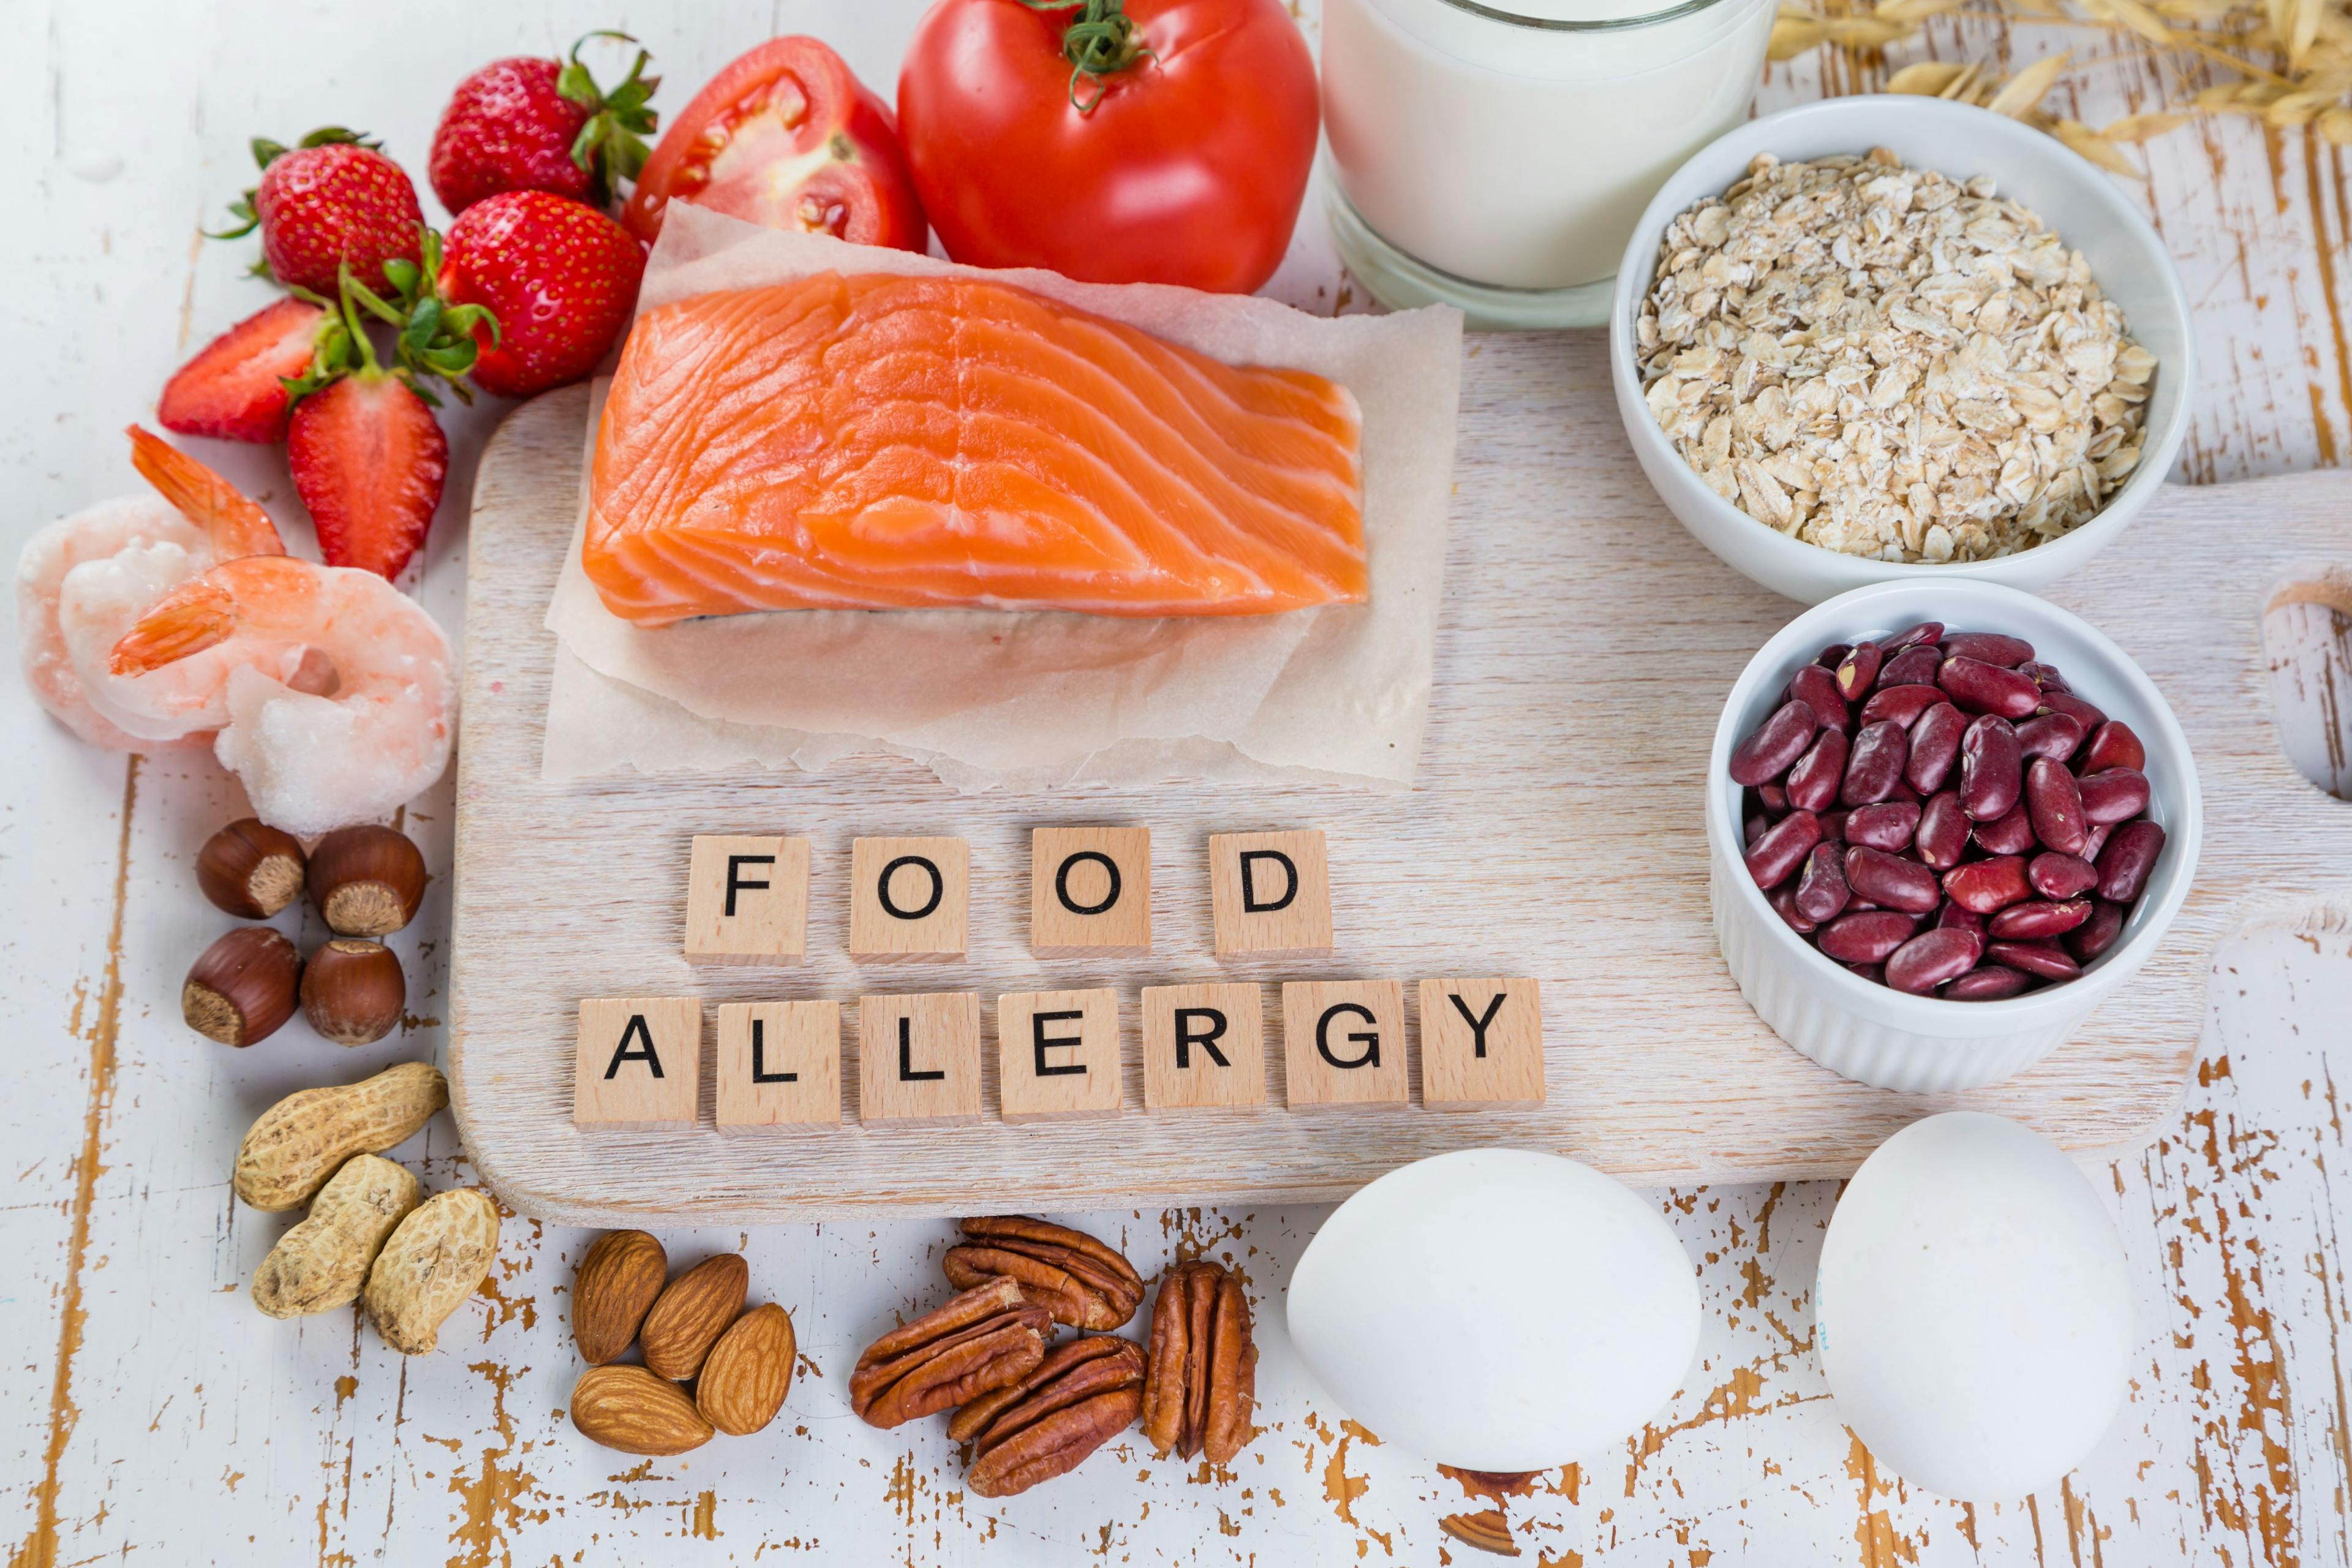 Essential advice to prevent food allergies